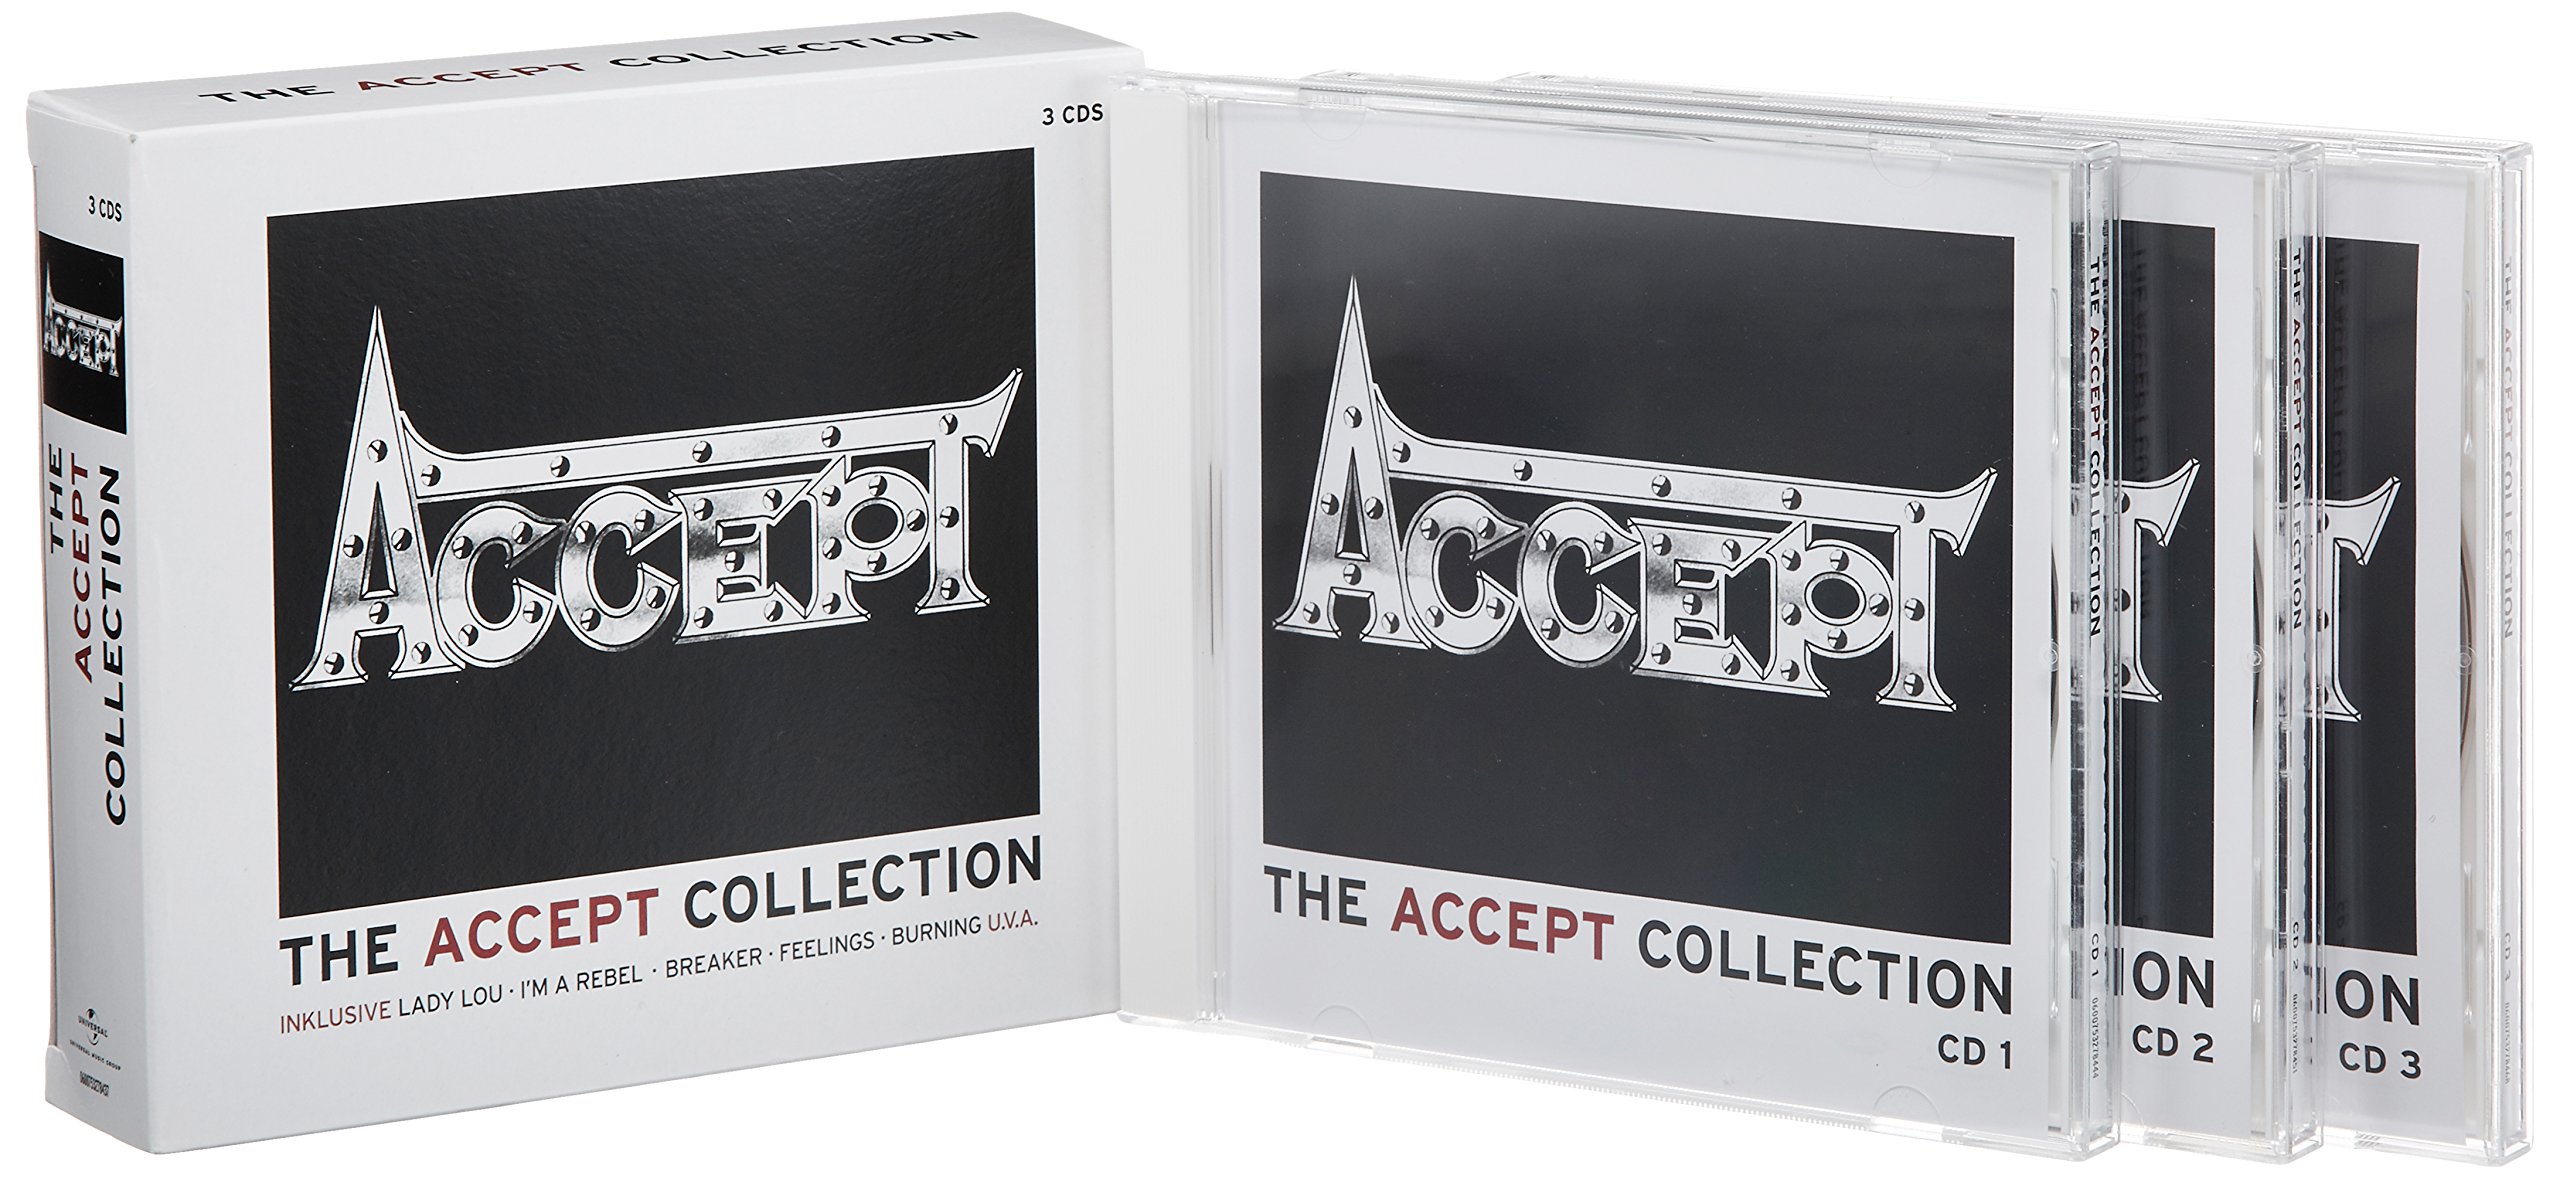 The Accept Collection